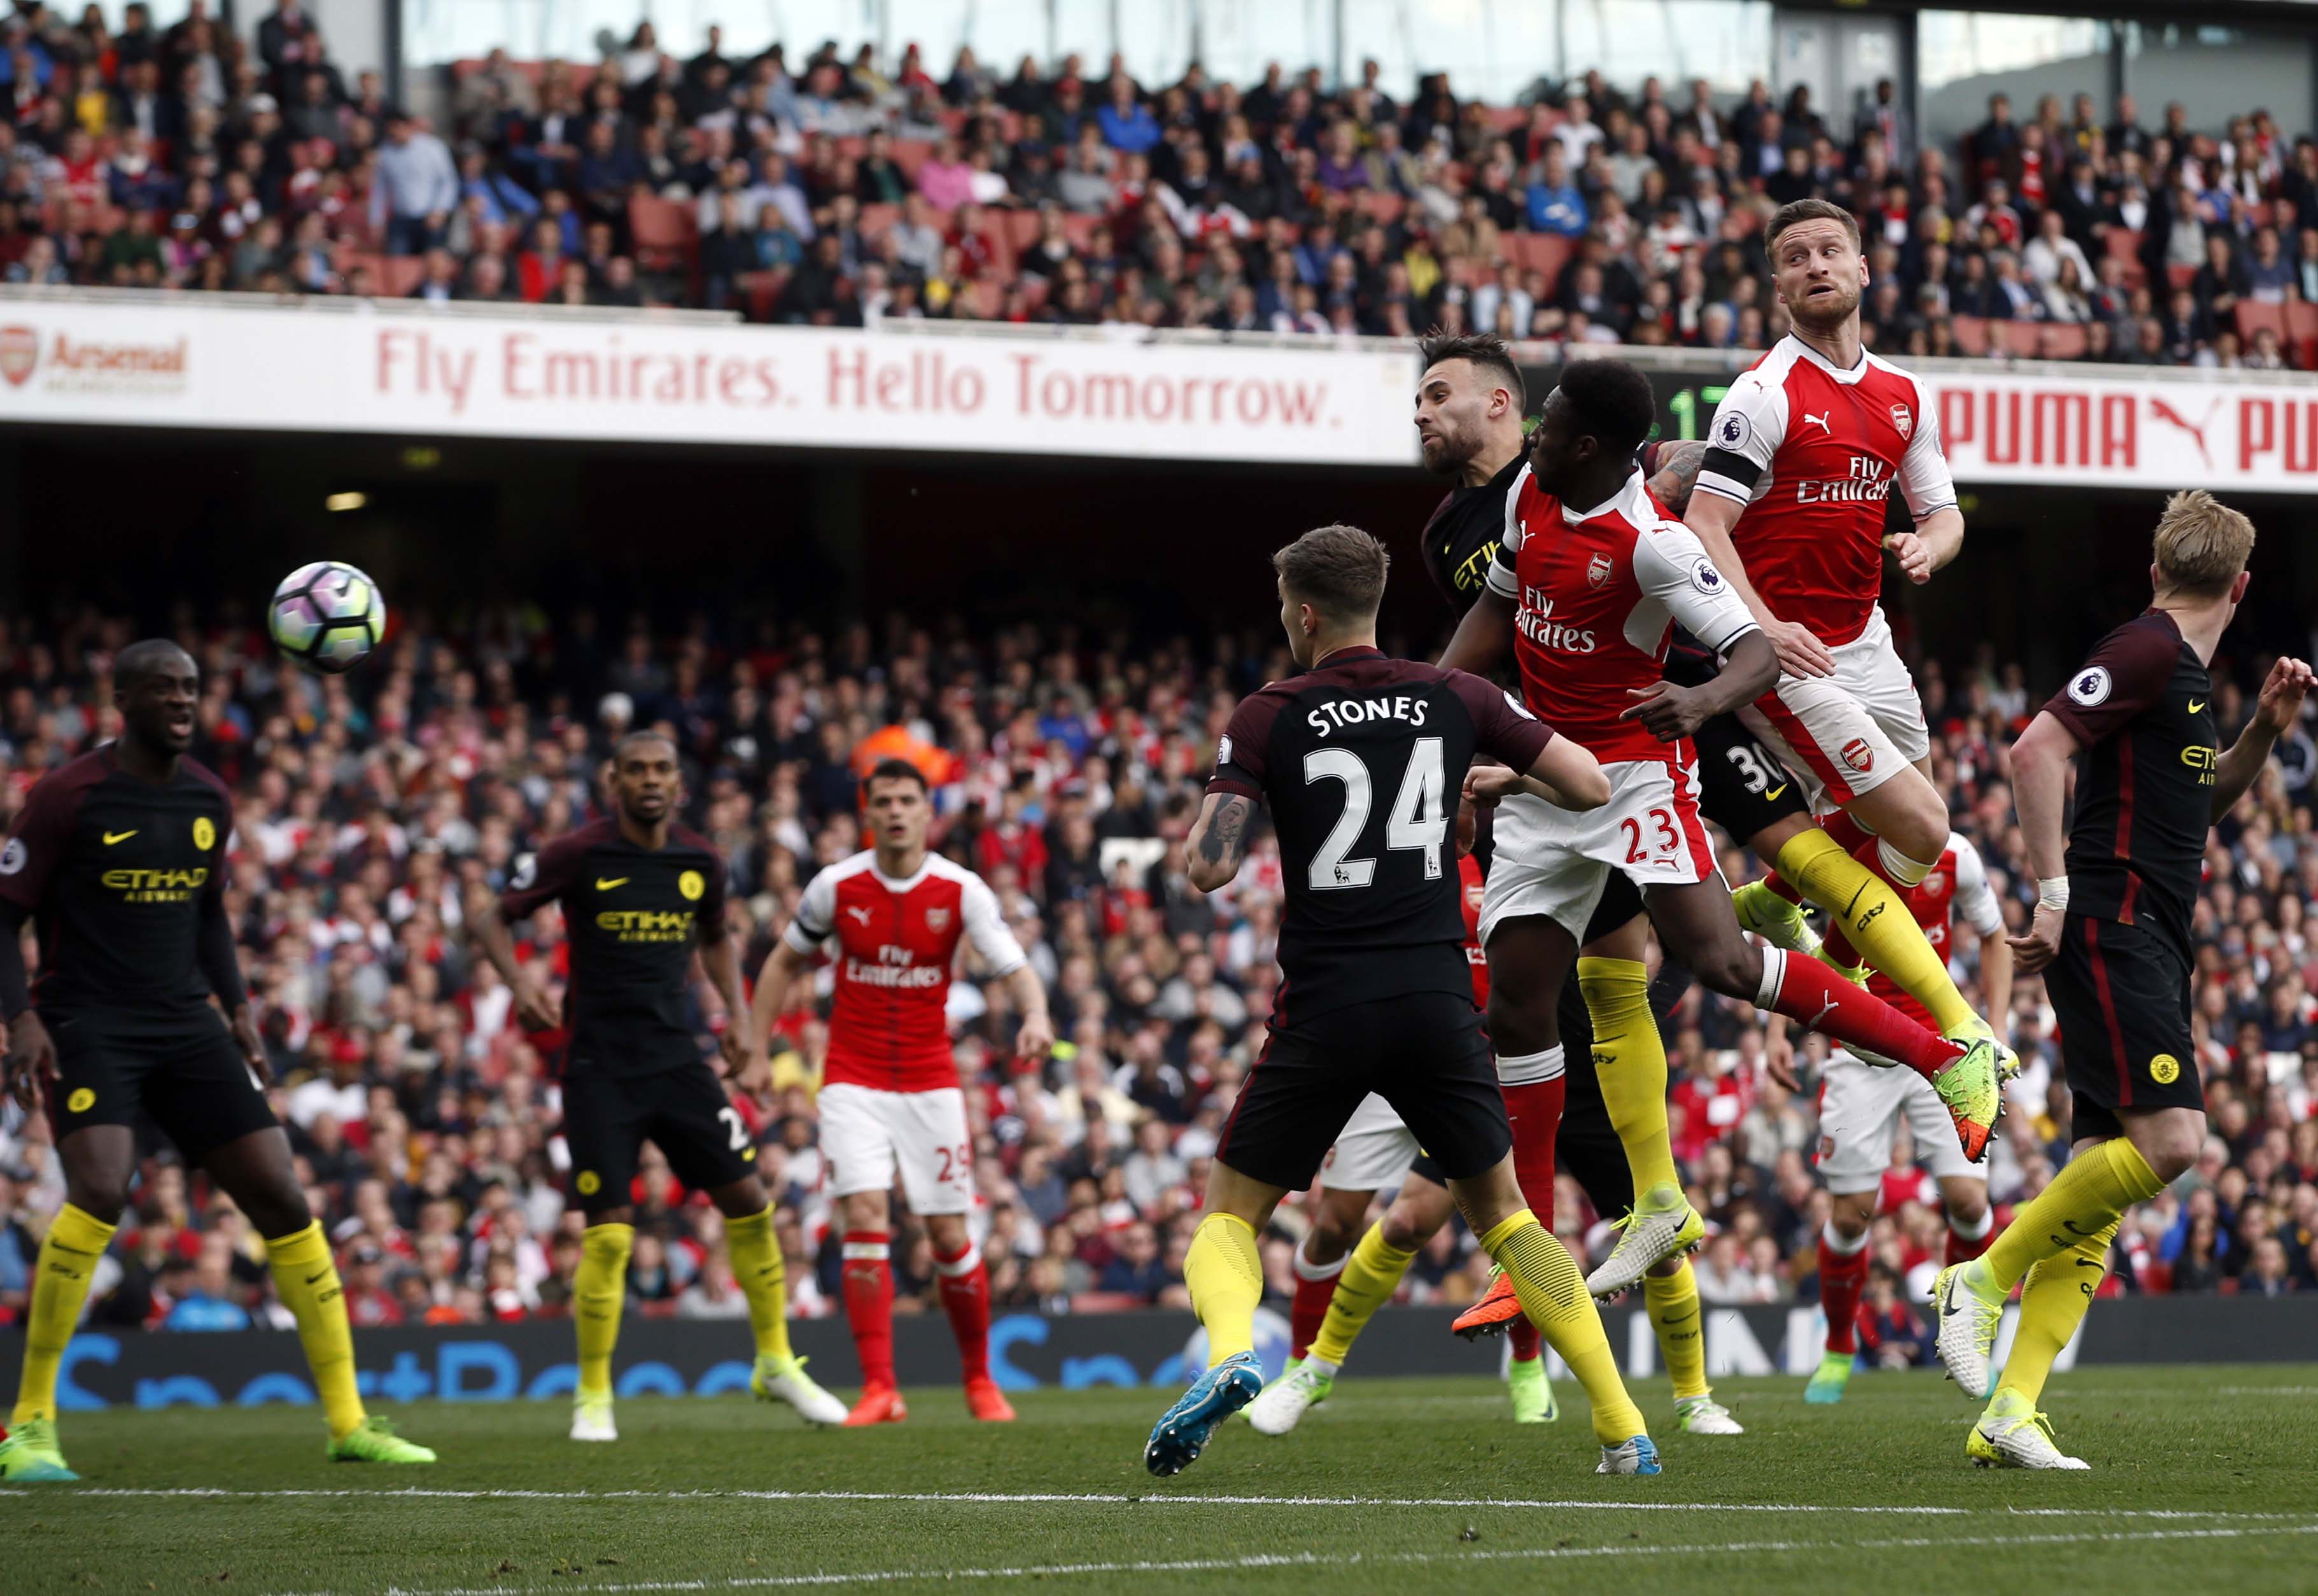 Arsenal's Shkodran Mustafi, 2nd right, scores his side's second goal during the English Premier League soccer match between Arsenal and Manchester City at the Emirates stadium in London, on Sunday, April 2, 2017. Photo: AP